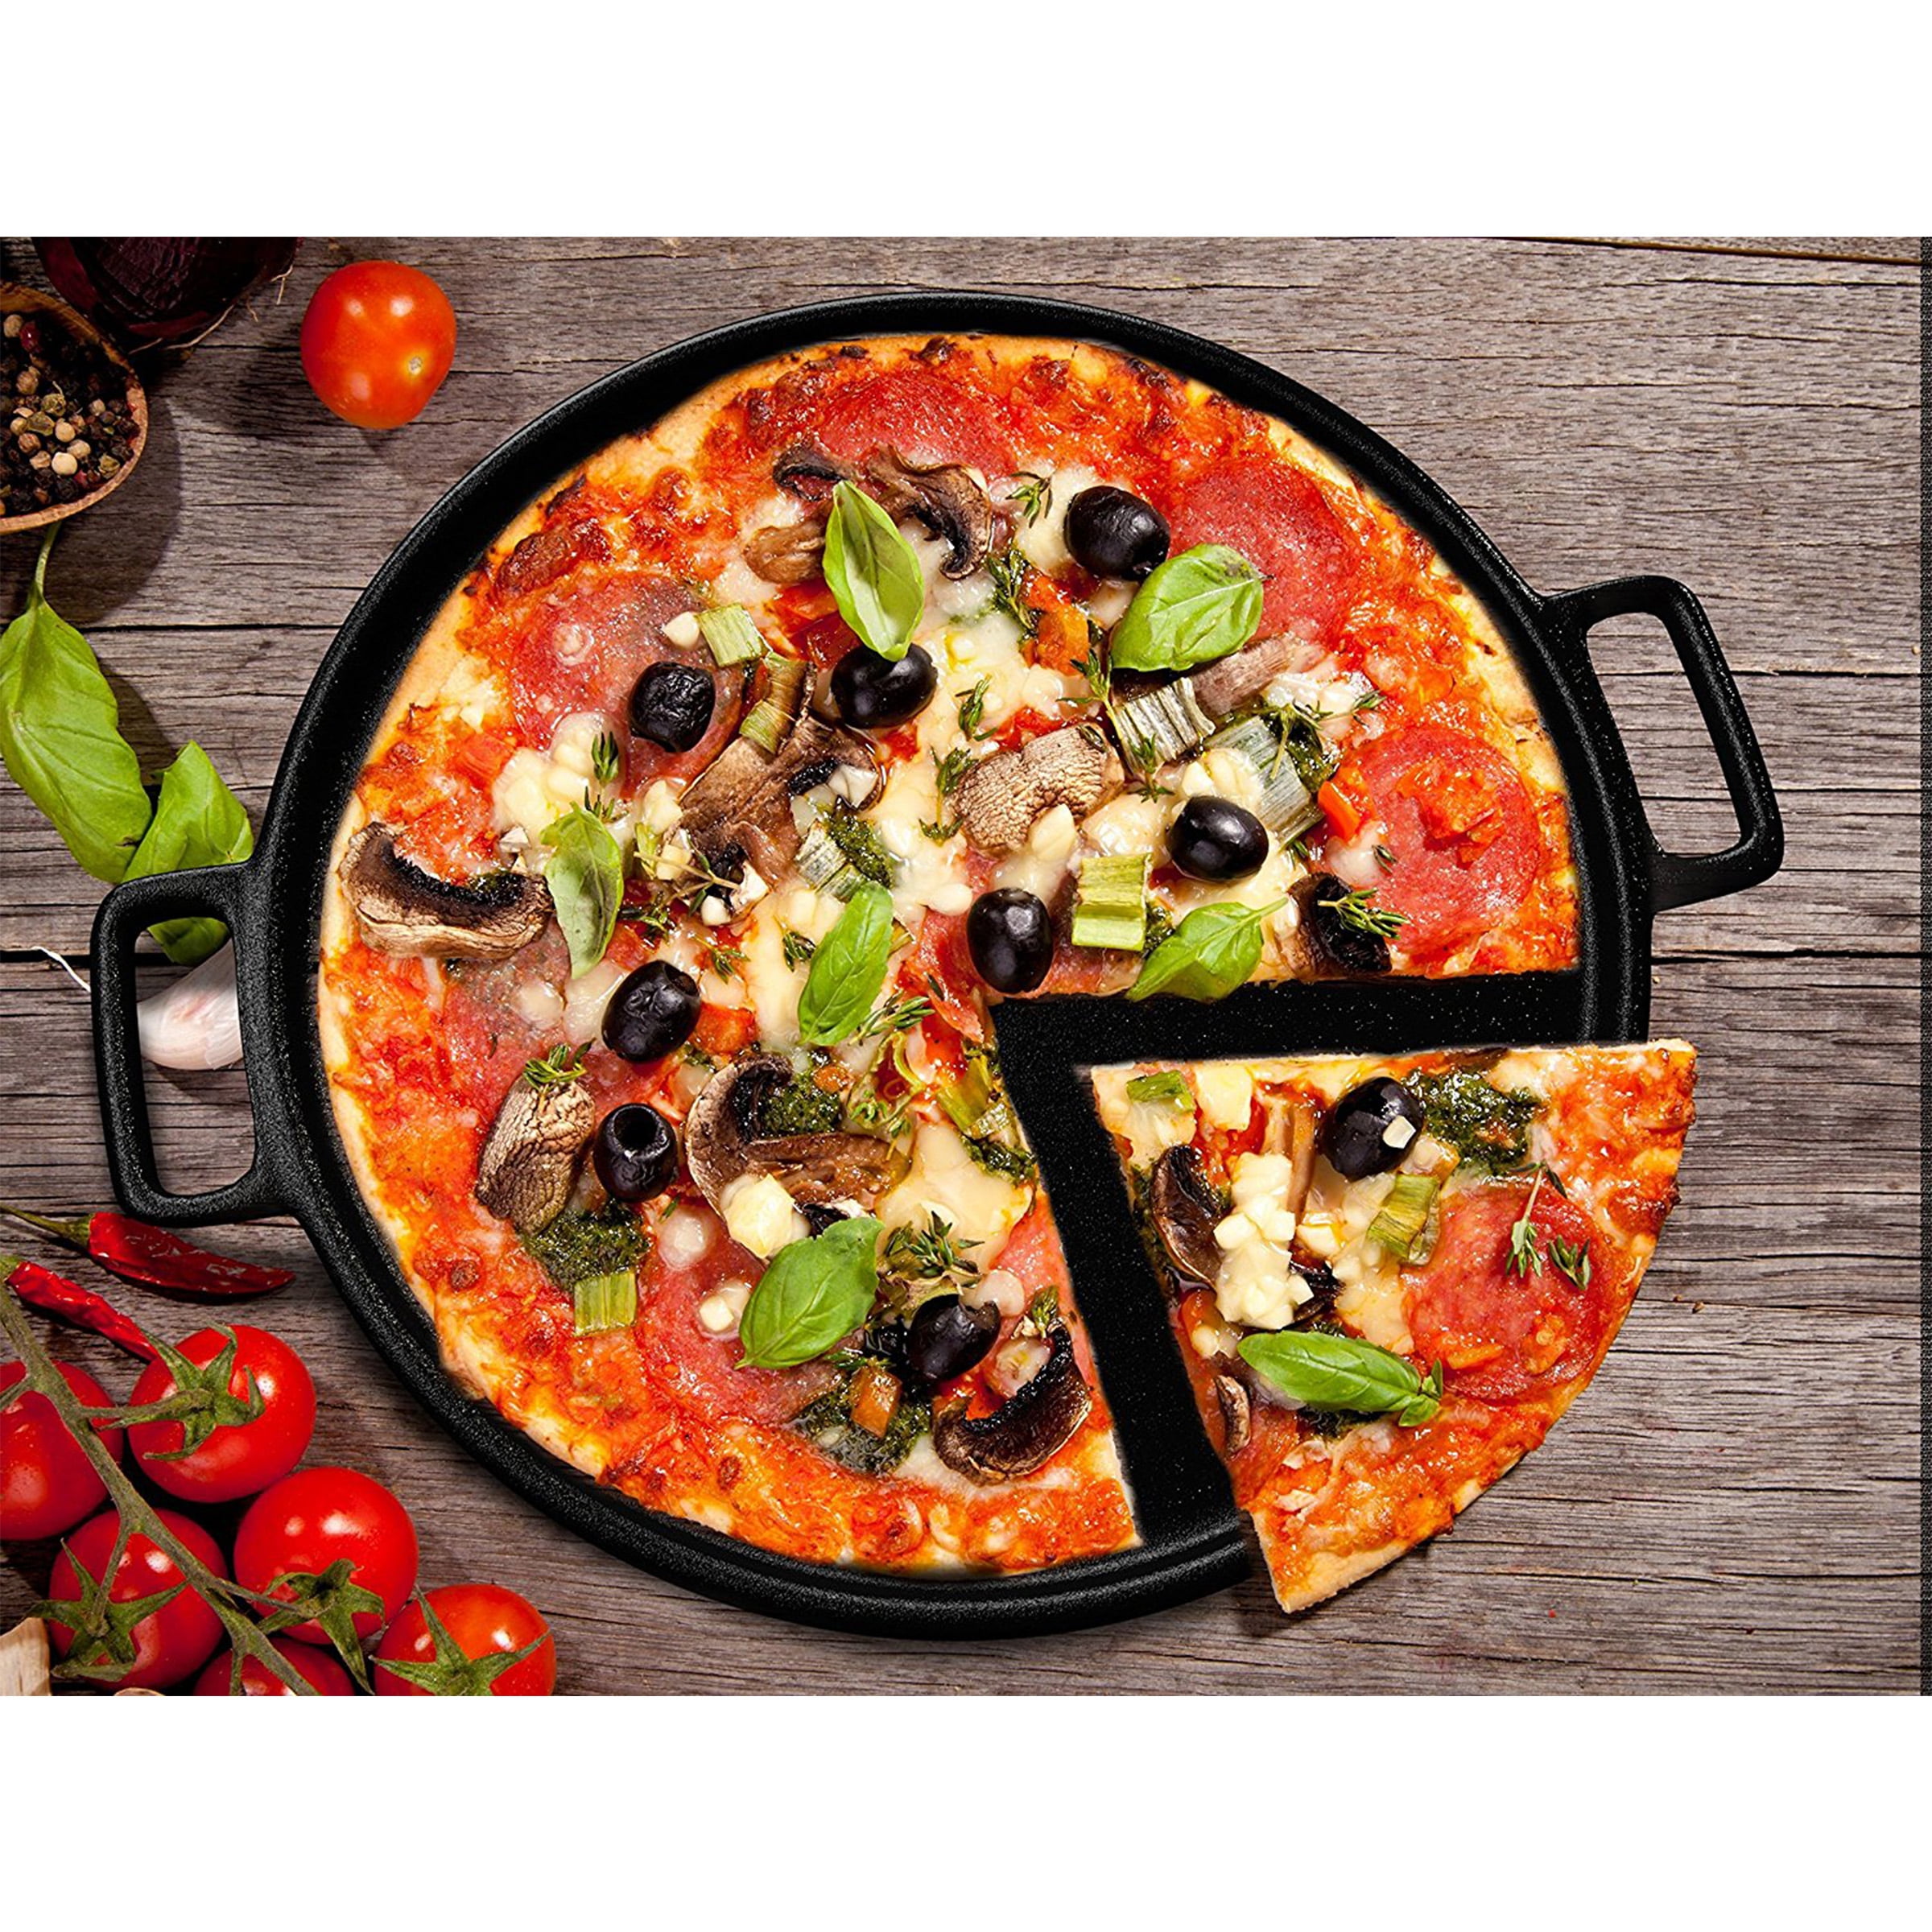  Max K 14-Inch Pizza Pan with Handles - Preseasoned Cast Iron  Cooking Pan for Baking, Roasting, Frying - Black: Home & Kitchen